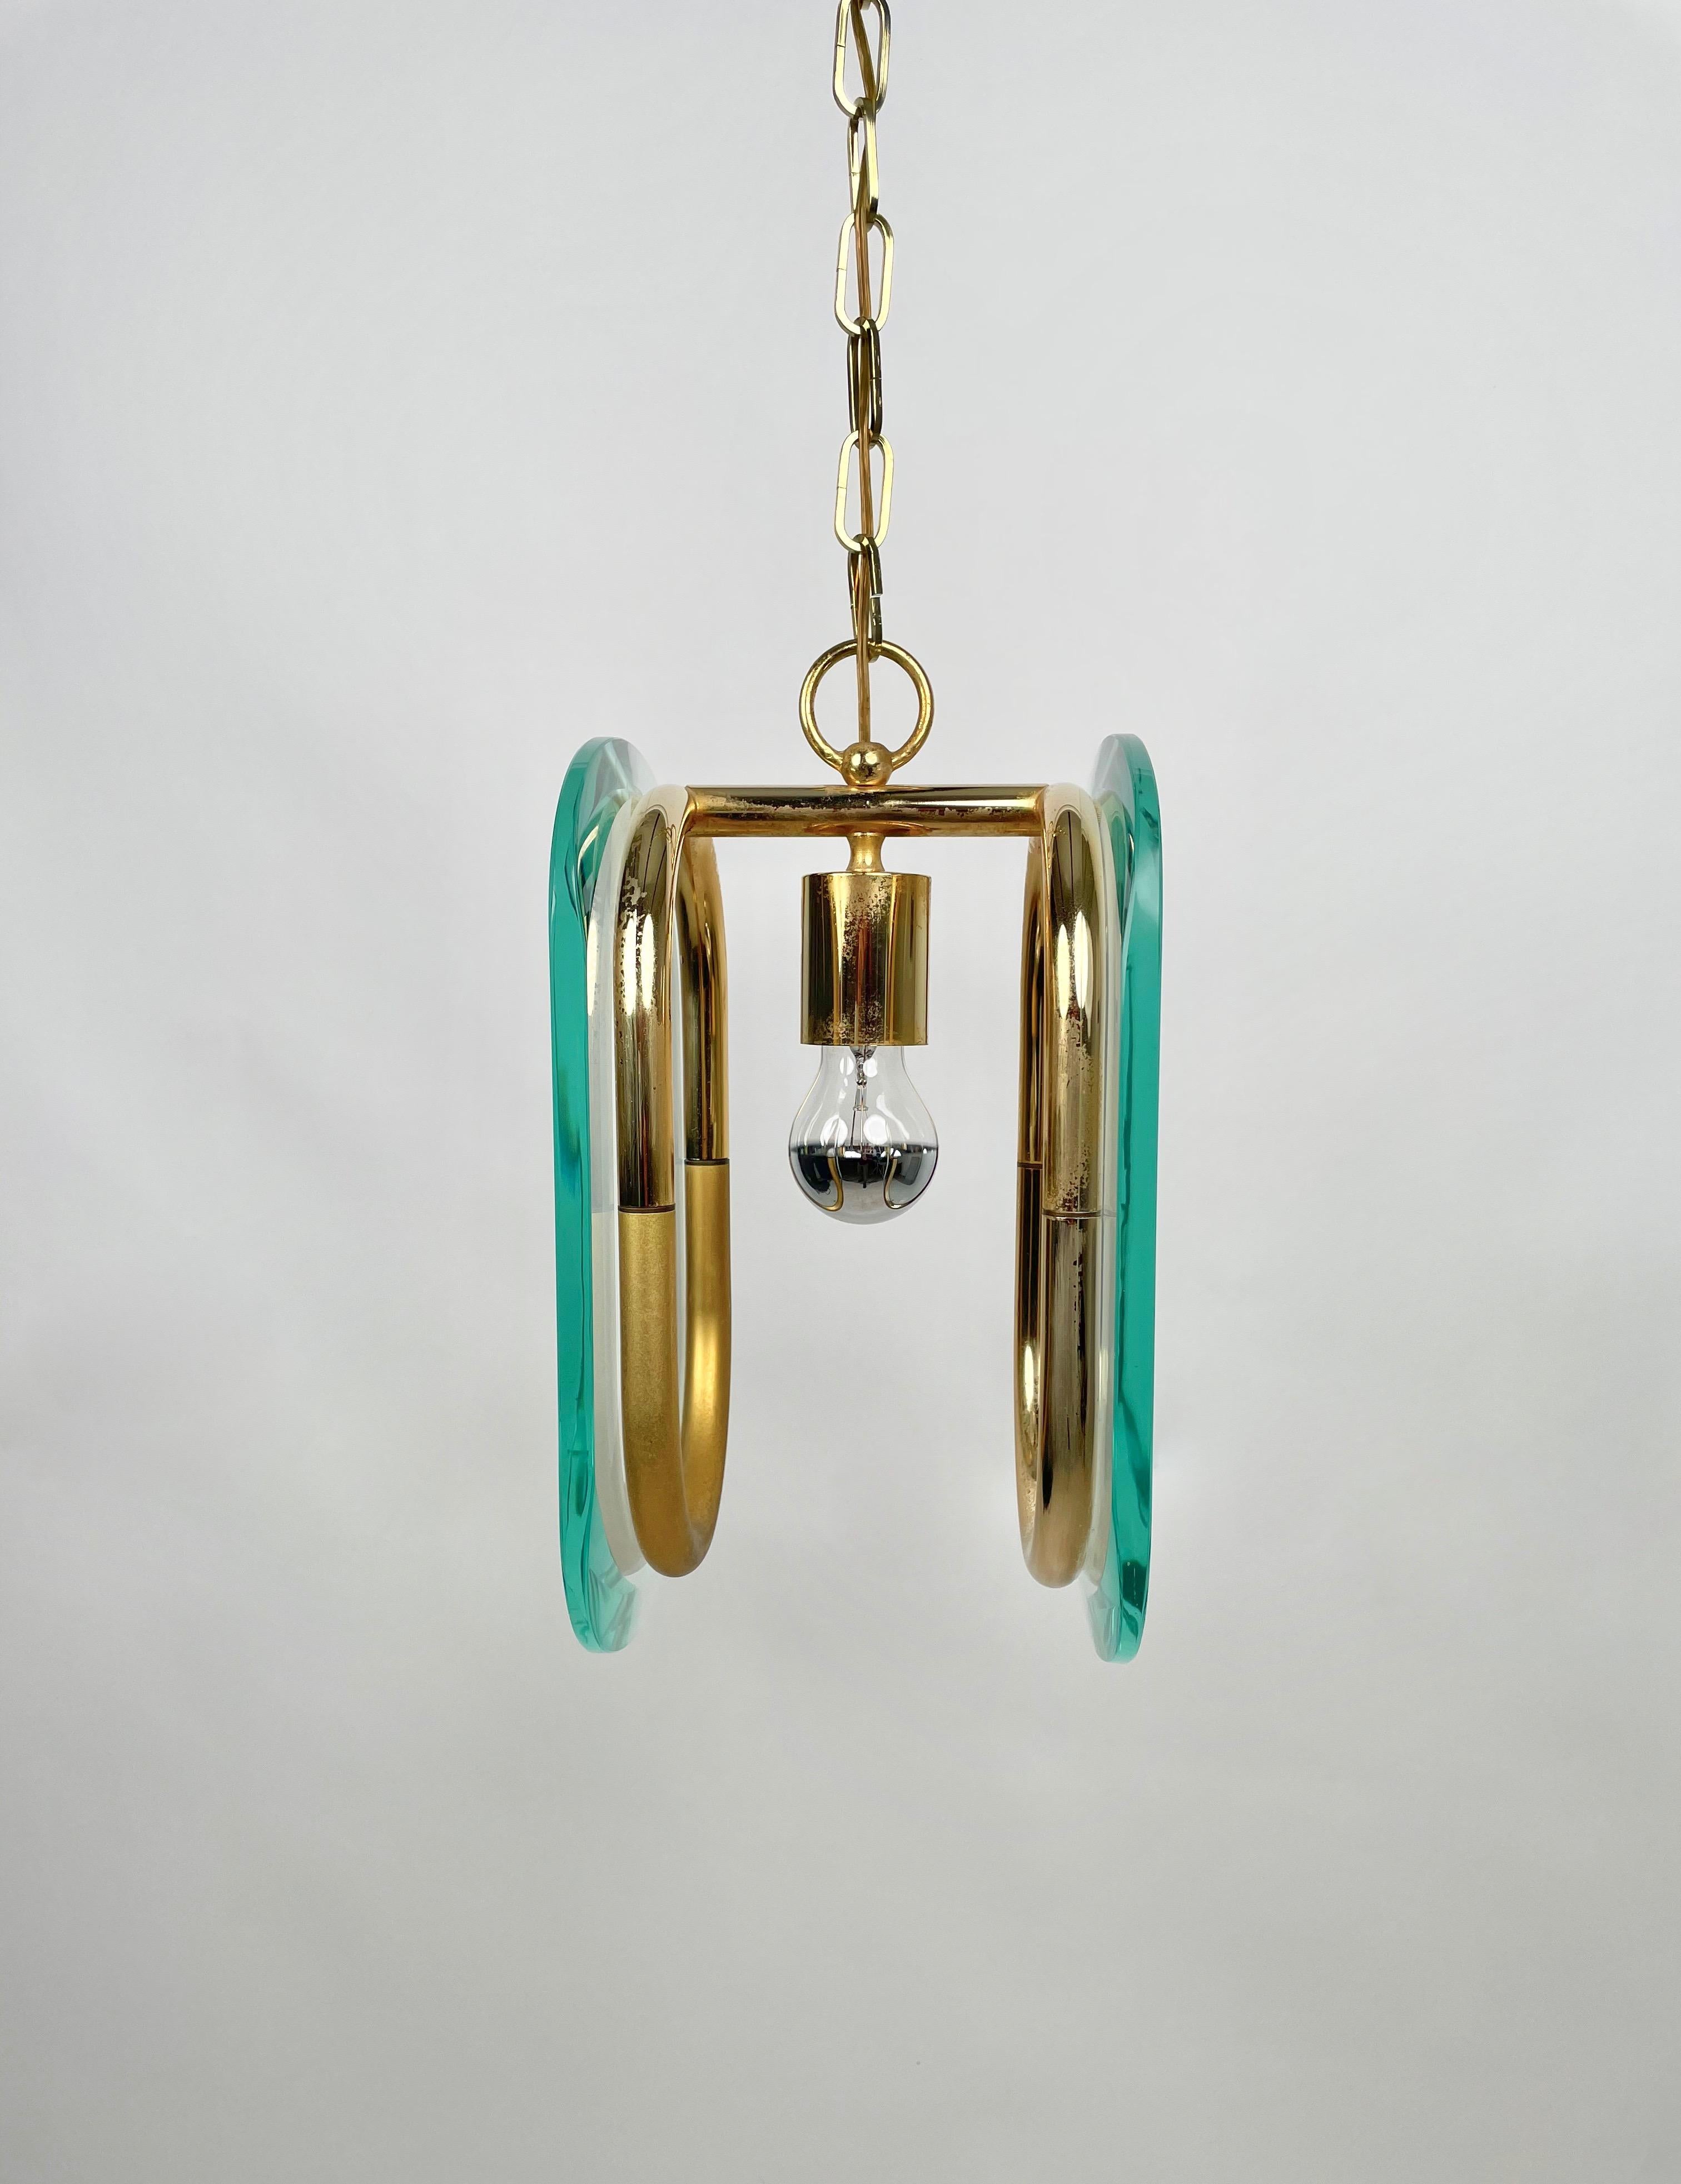 Metal Brass and Glass Chandelier Fontana Arte Style, Italy, 1970s For Sale